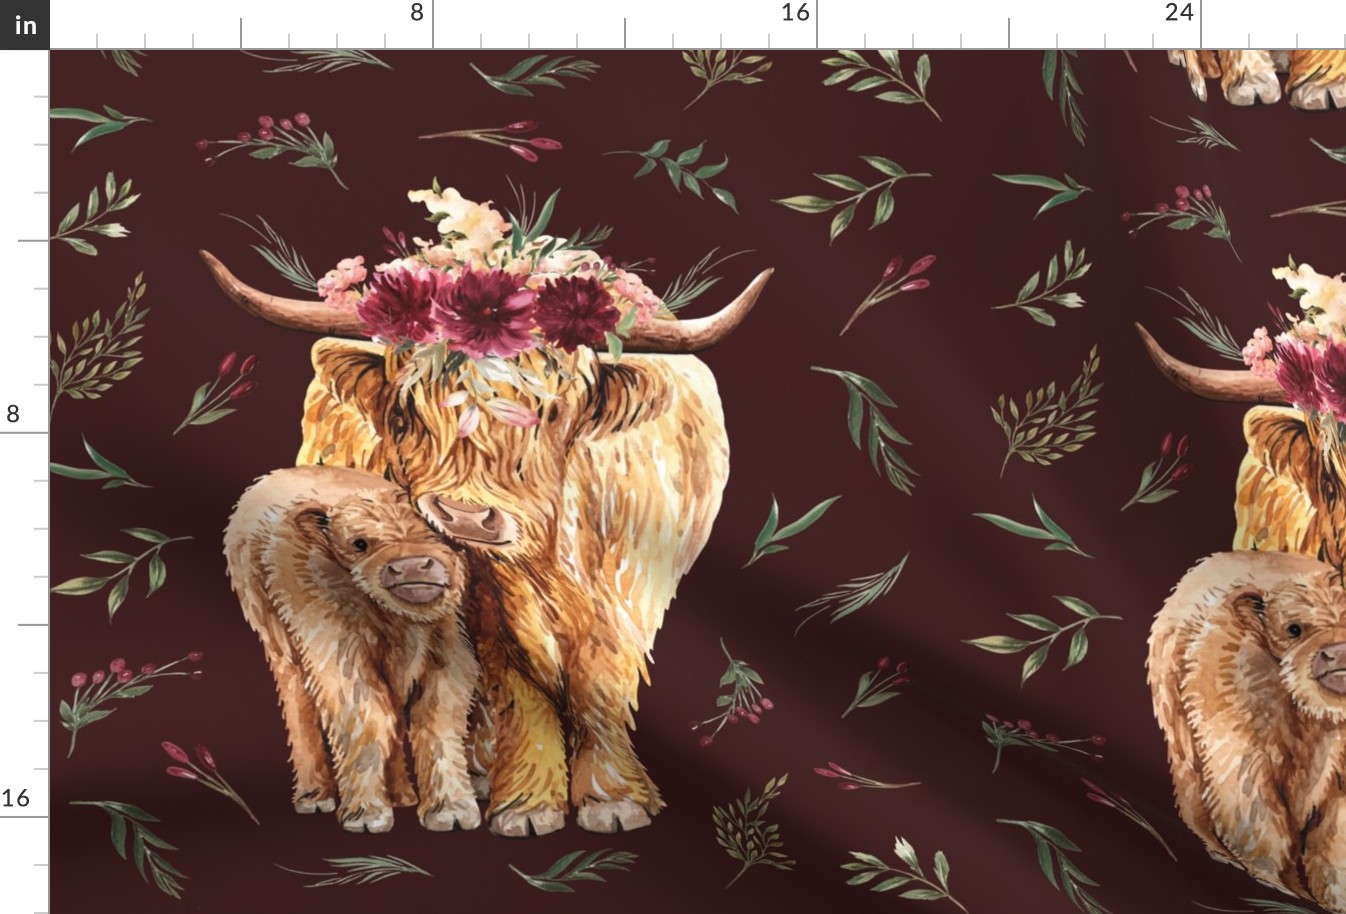 18x18" highland cow patch on maroon